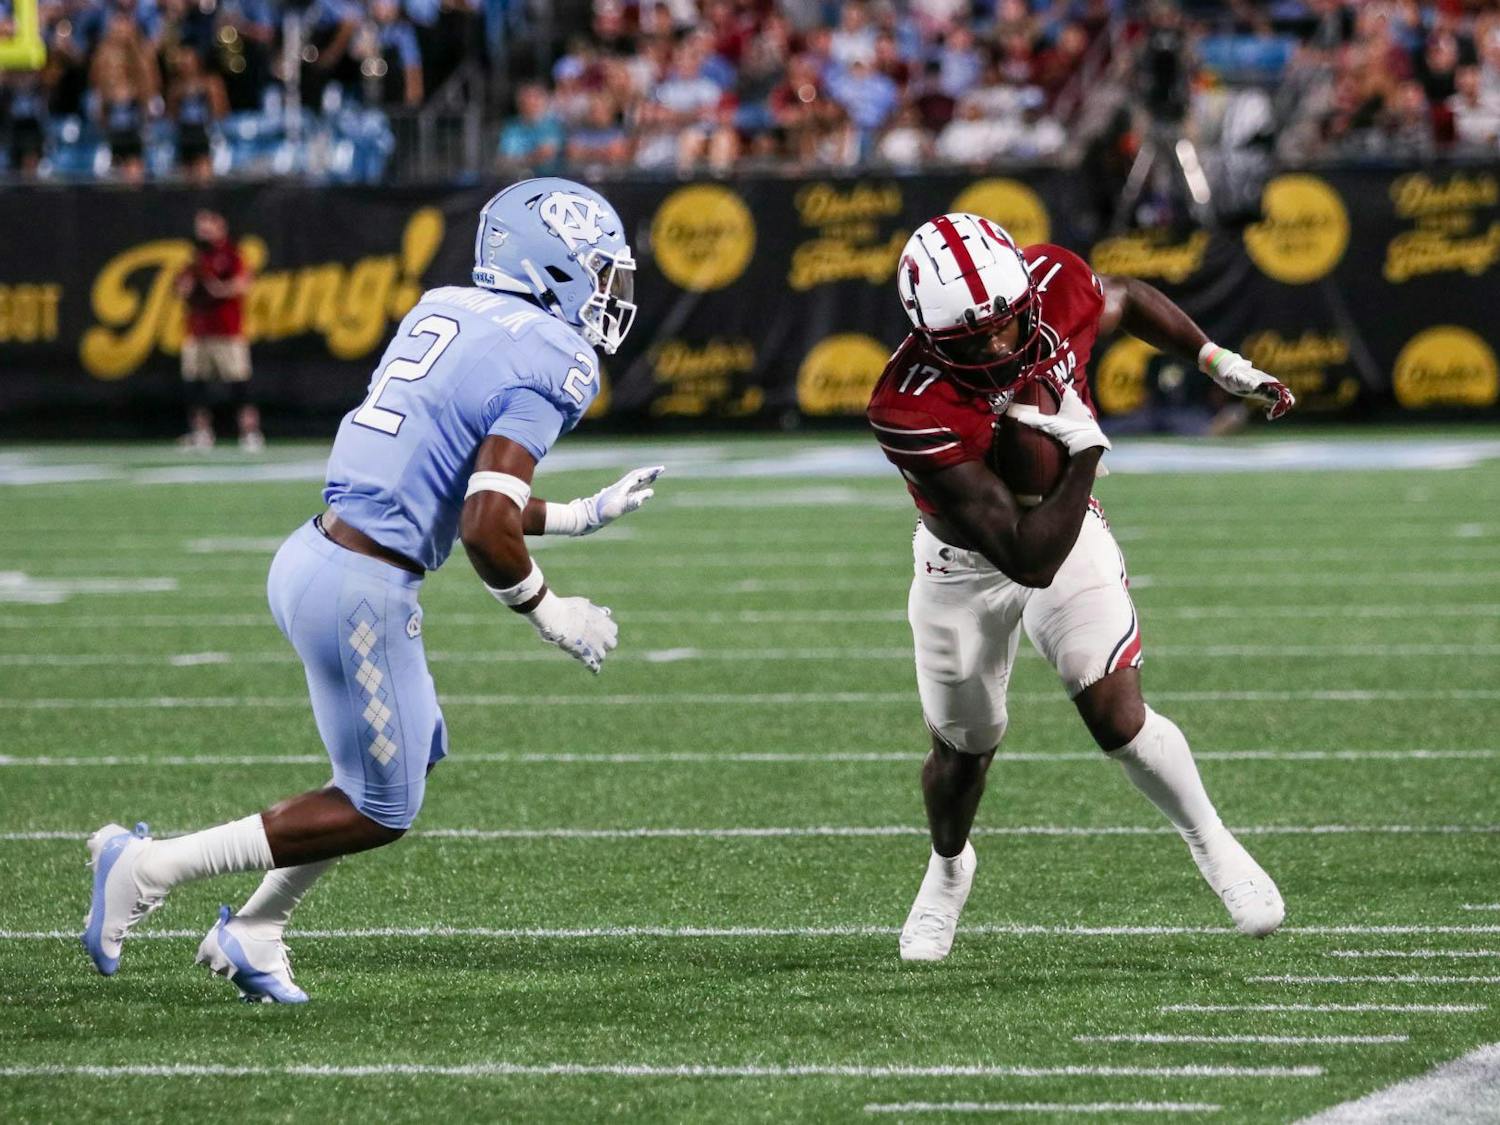 Fifth-year wide receiver Xavier Legette dodges a player from the University of North Carolina as he runs. Legette received nine balls for a combined 178 yards during the game.